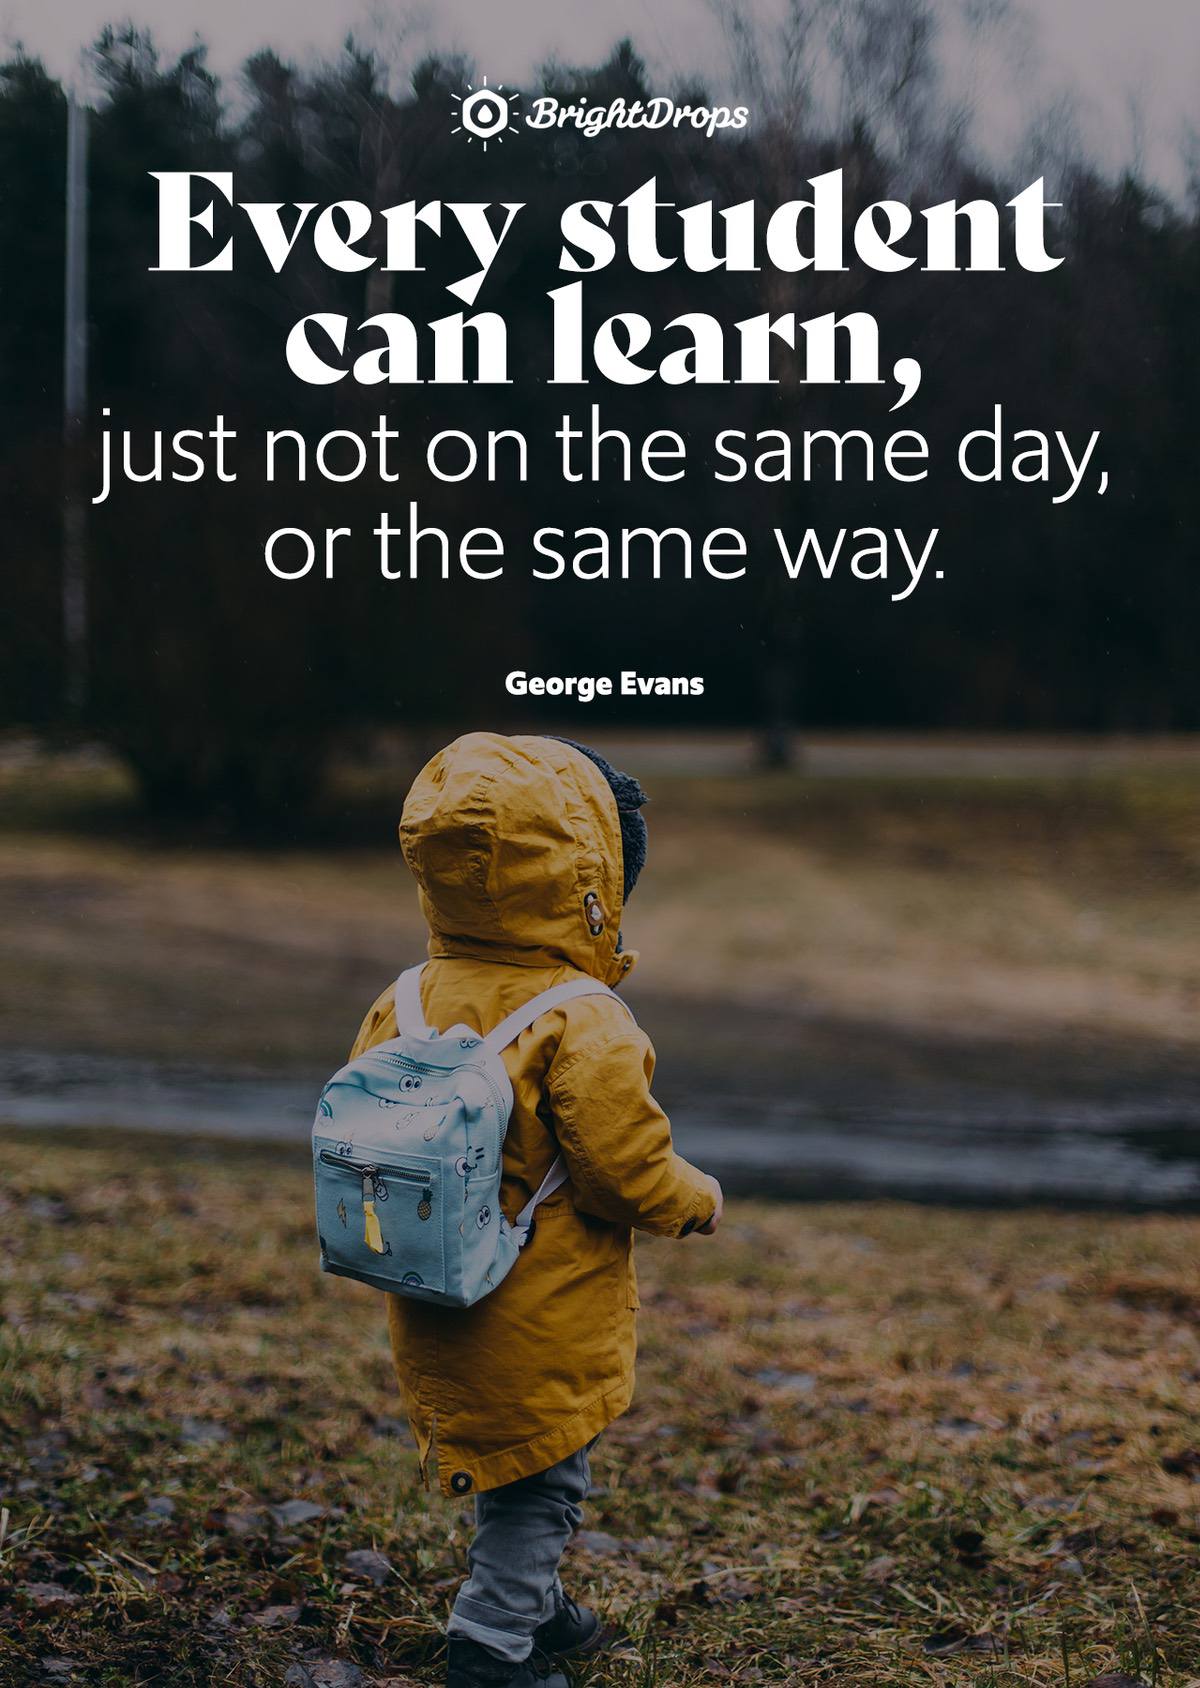 Every student can learn, just not on the same day, or the same way. - George Evans